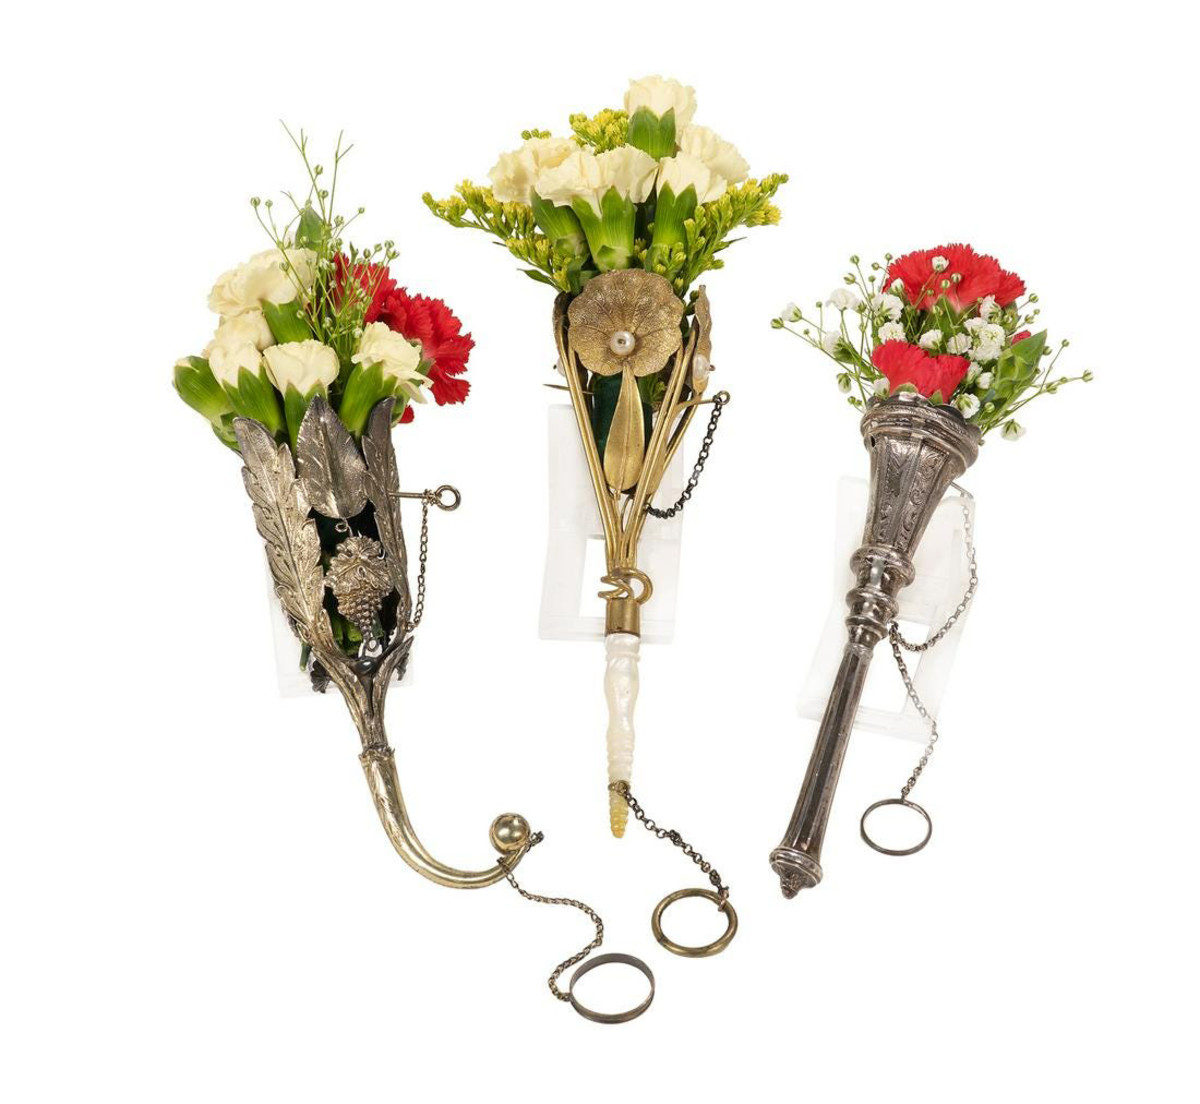 Lot of three Victorian tussie-mussies, late 19th century, each with a chained pin and finger ring: gilt metal with embossed lily pads centered by a faux pearl, turned nacre handle, 6-1/4” l; silver with tapering paneled cup and handle, engraved scrolls, 5-3/4” l; and gilt metal with embossed acanthus fronds and grape clusters, scroll handle with ball finial, 5-1/2” l; $950.